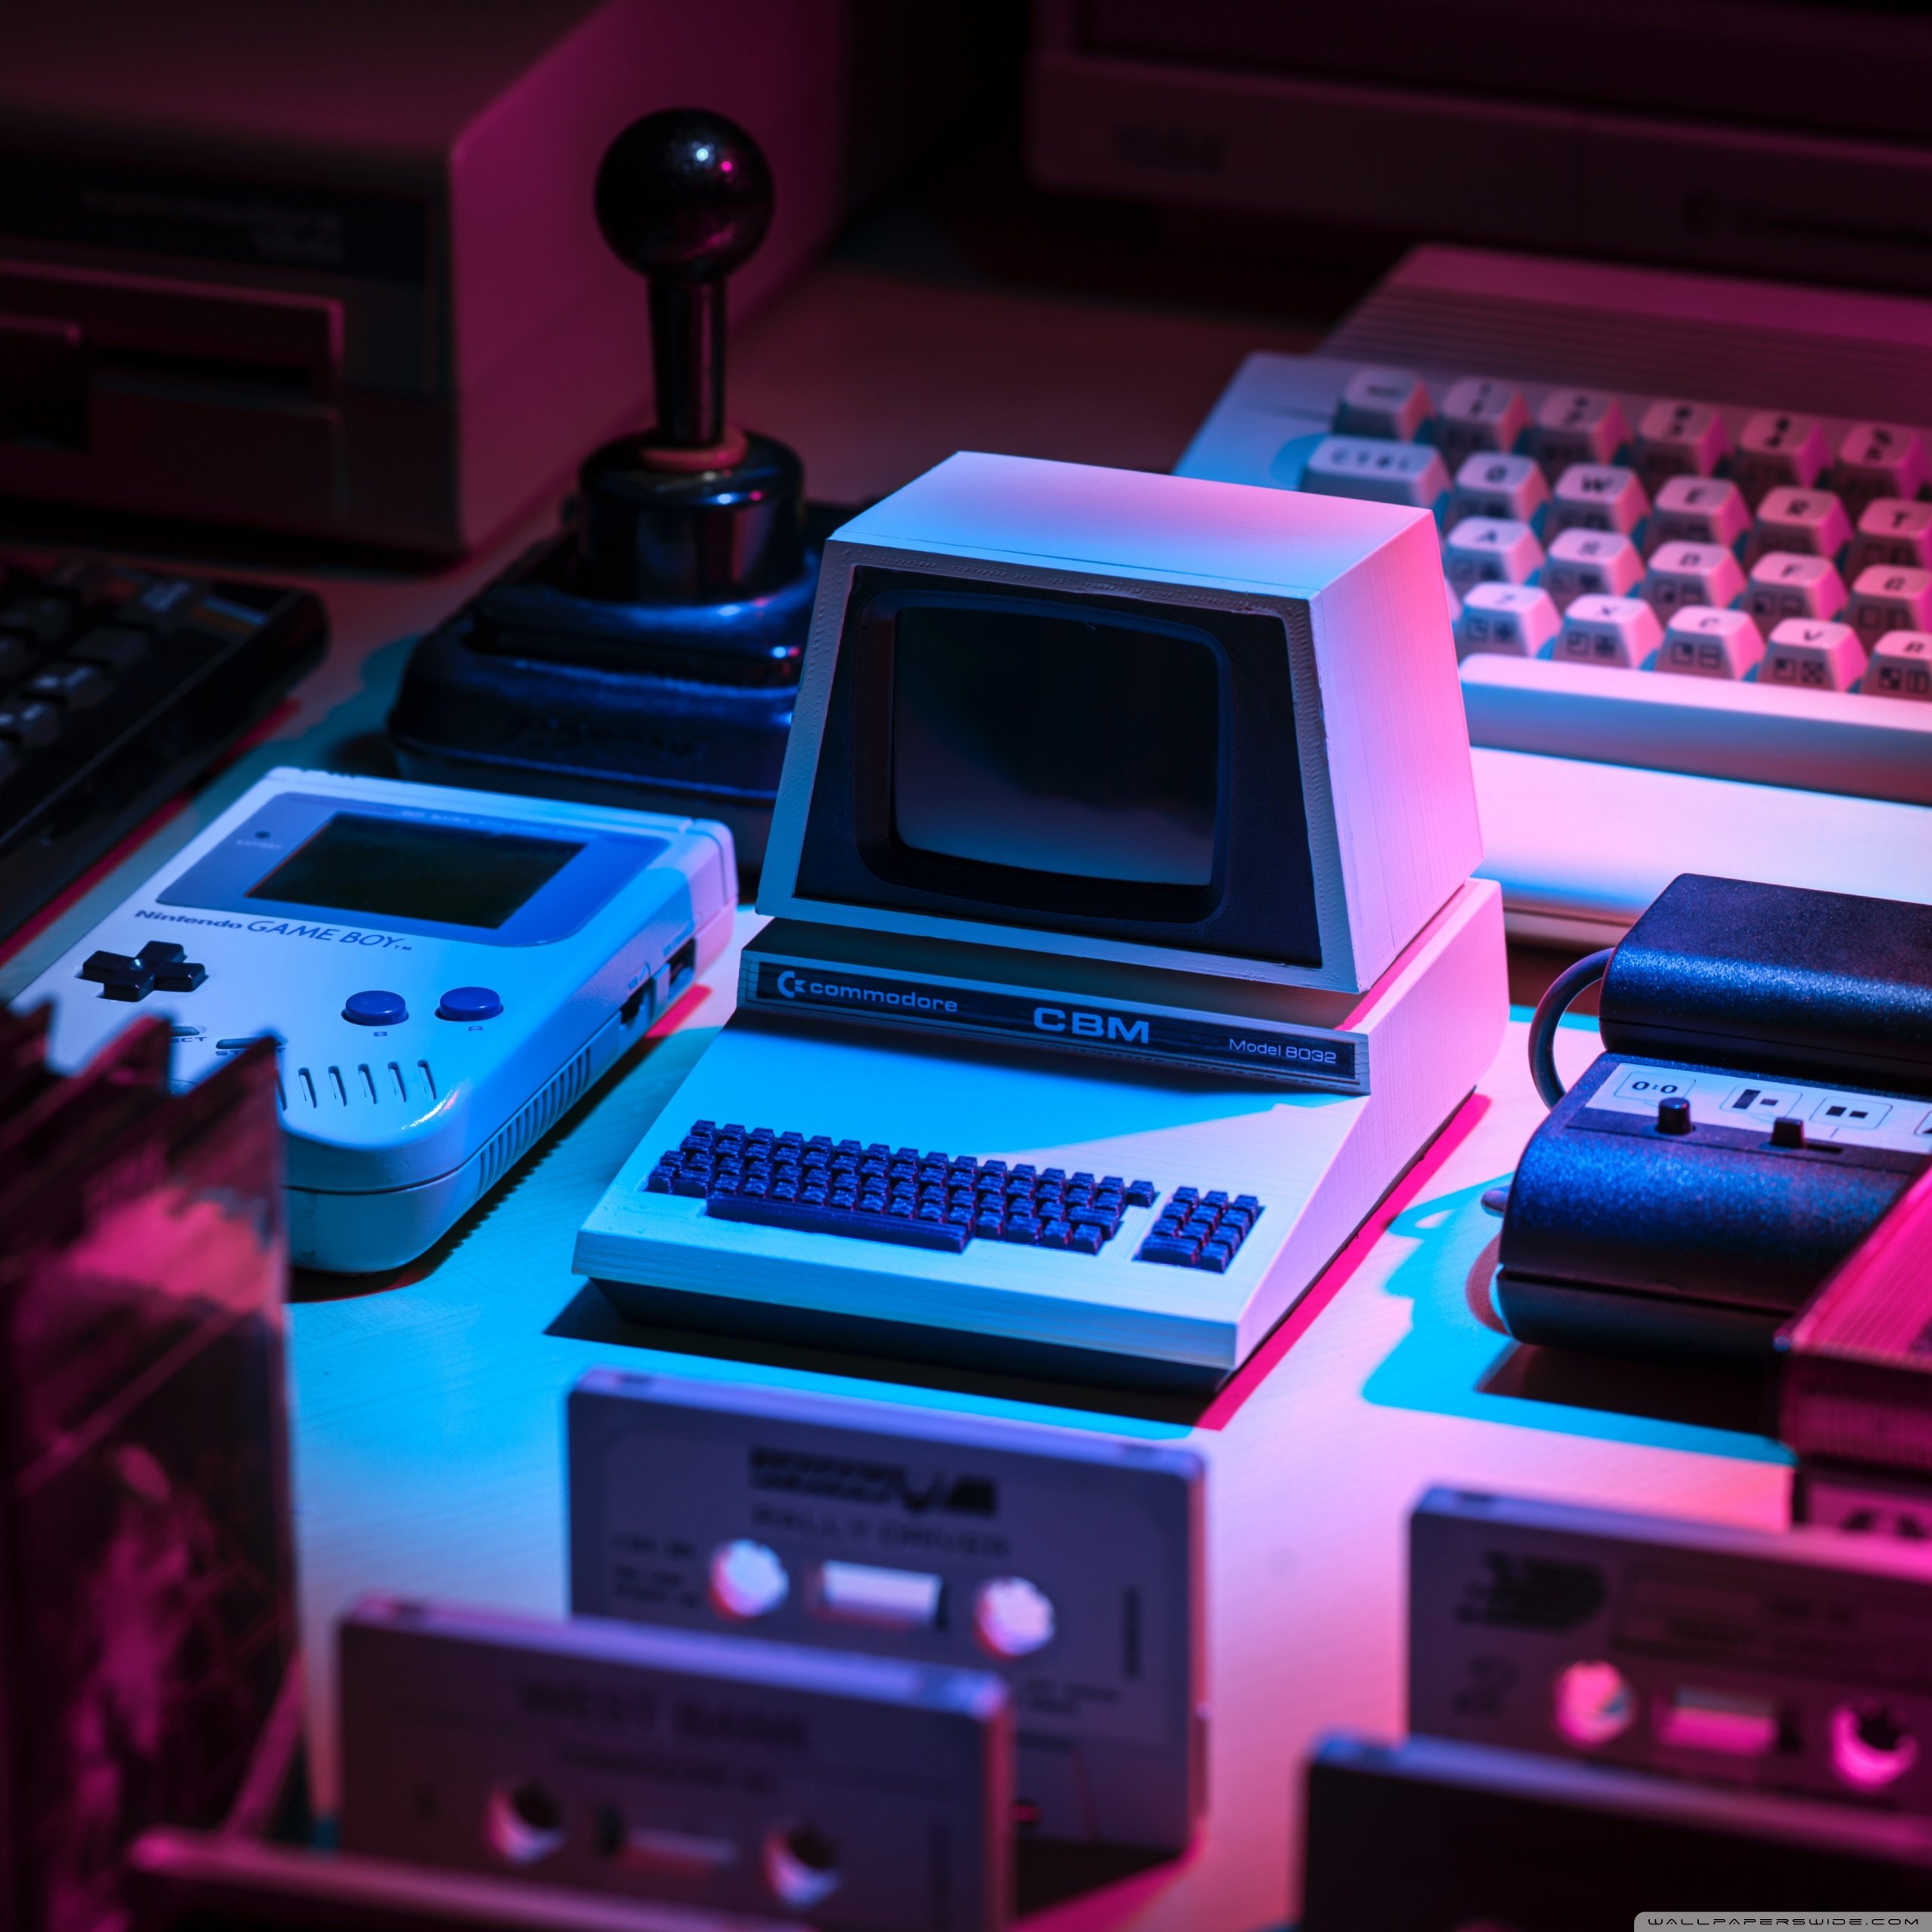 Retro Computer Aesthetic Ultra HD Desktop Backgrounds Wallpapers for